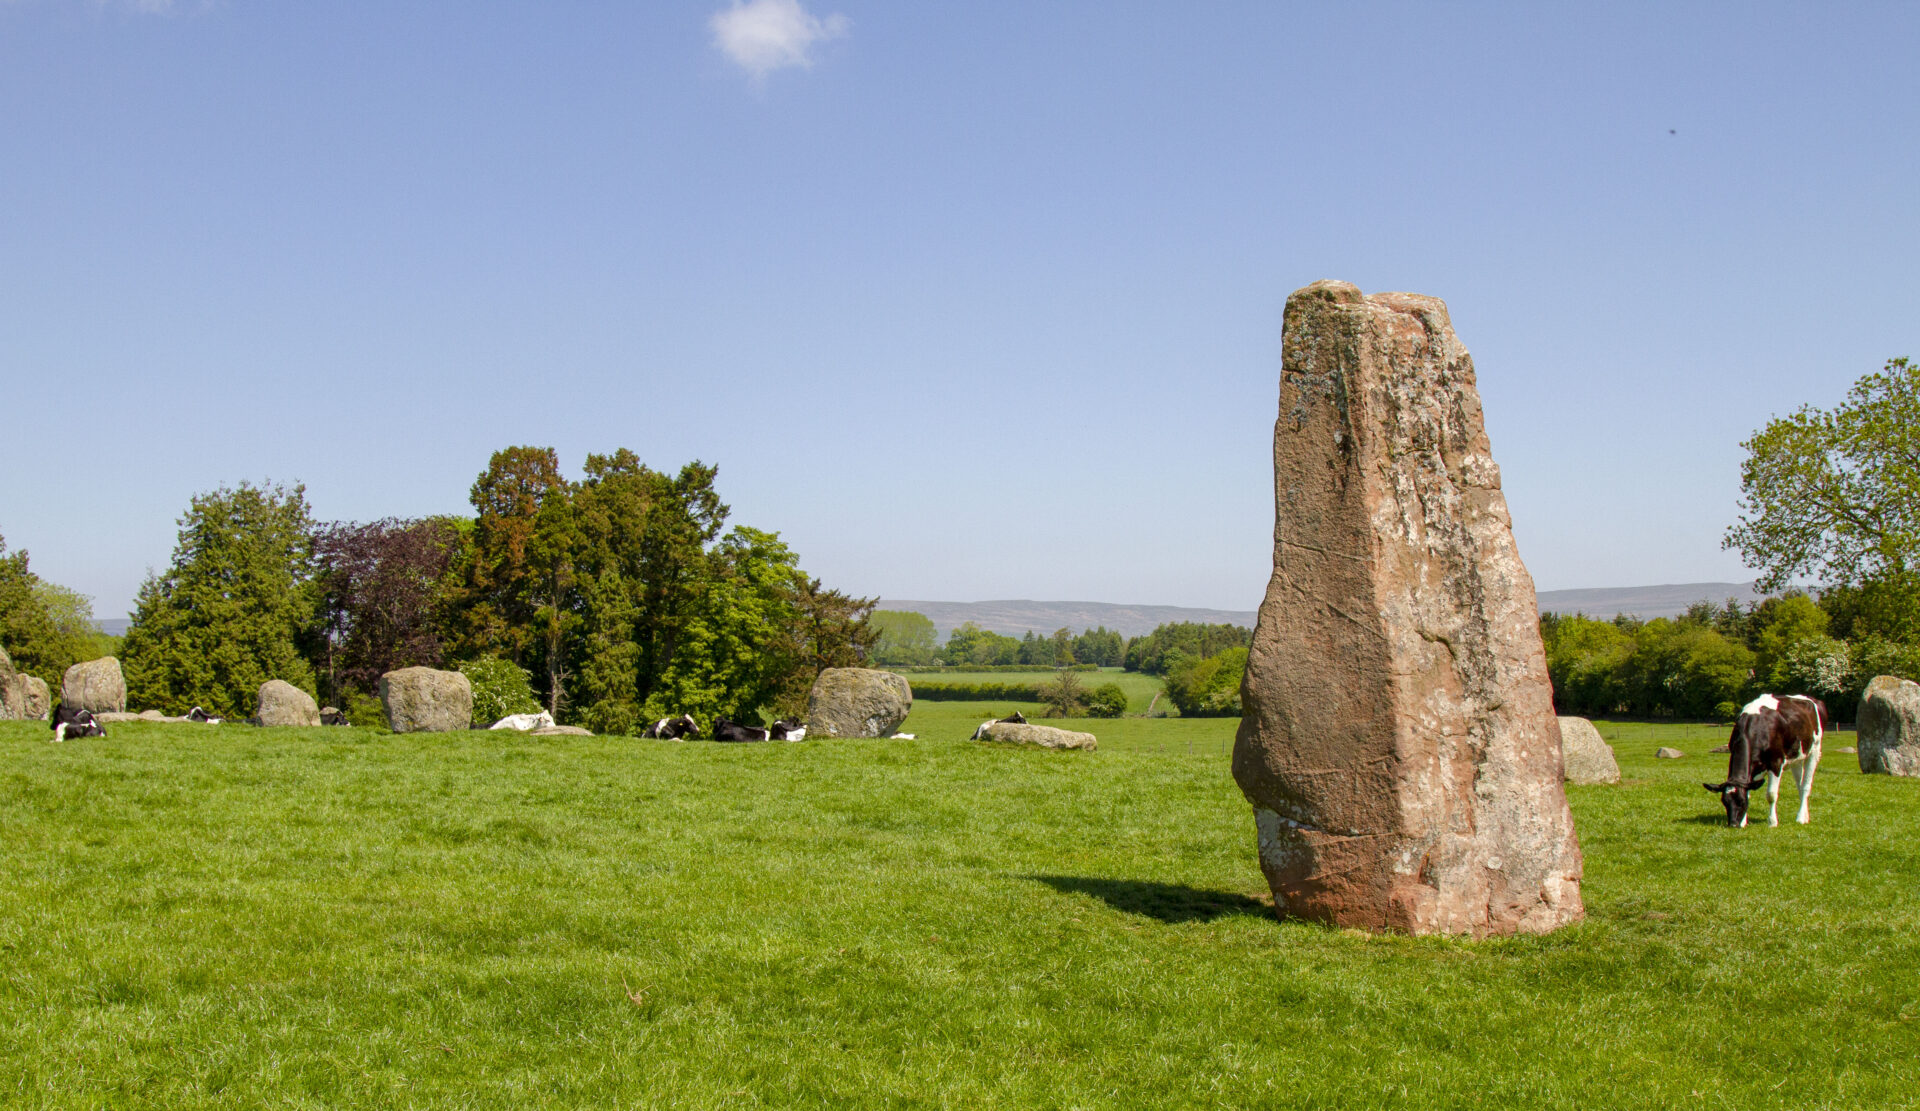 The image shows a grassy field with Long Meg, a red sandstone rock, in the foreground and blue sky above. In the background there are more stones and cows. In the distance there are trees.